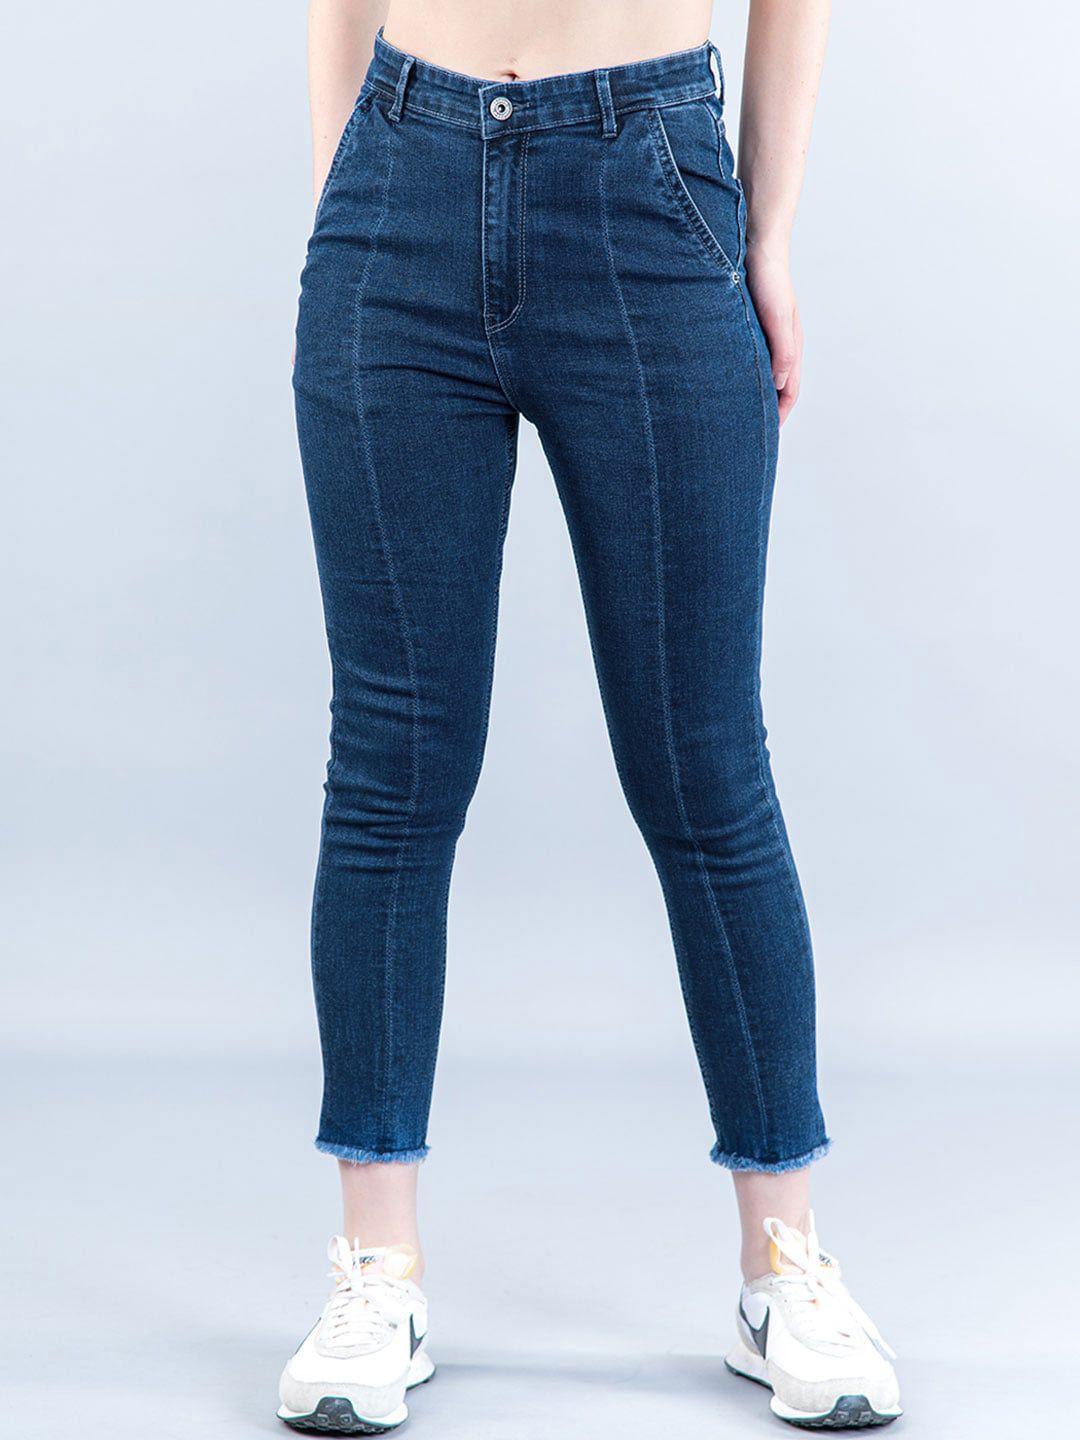 tistabene-women-comfort-skinny-fit-stretchable-jeans